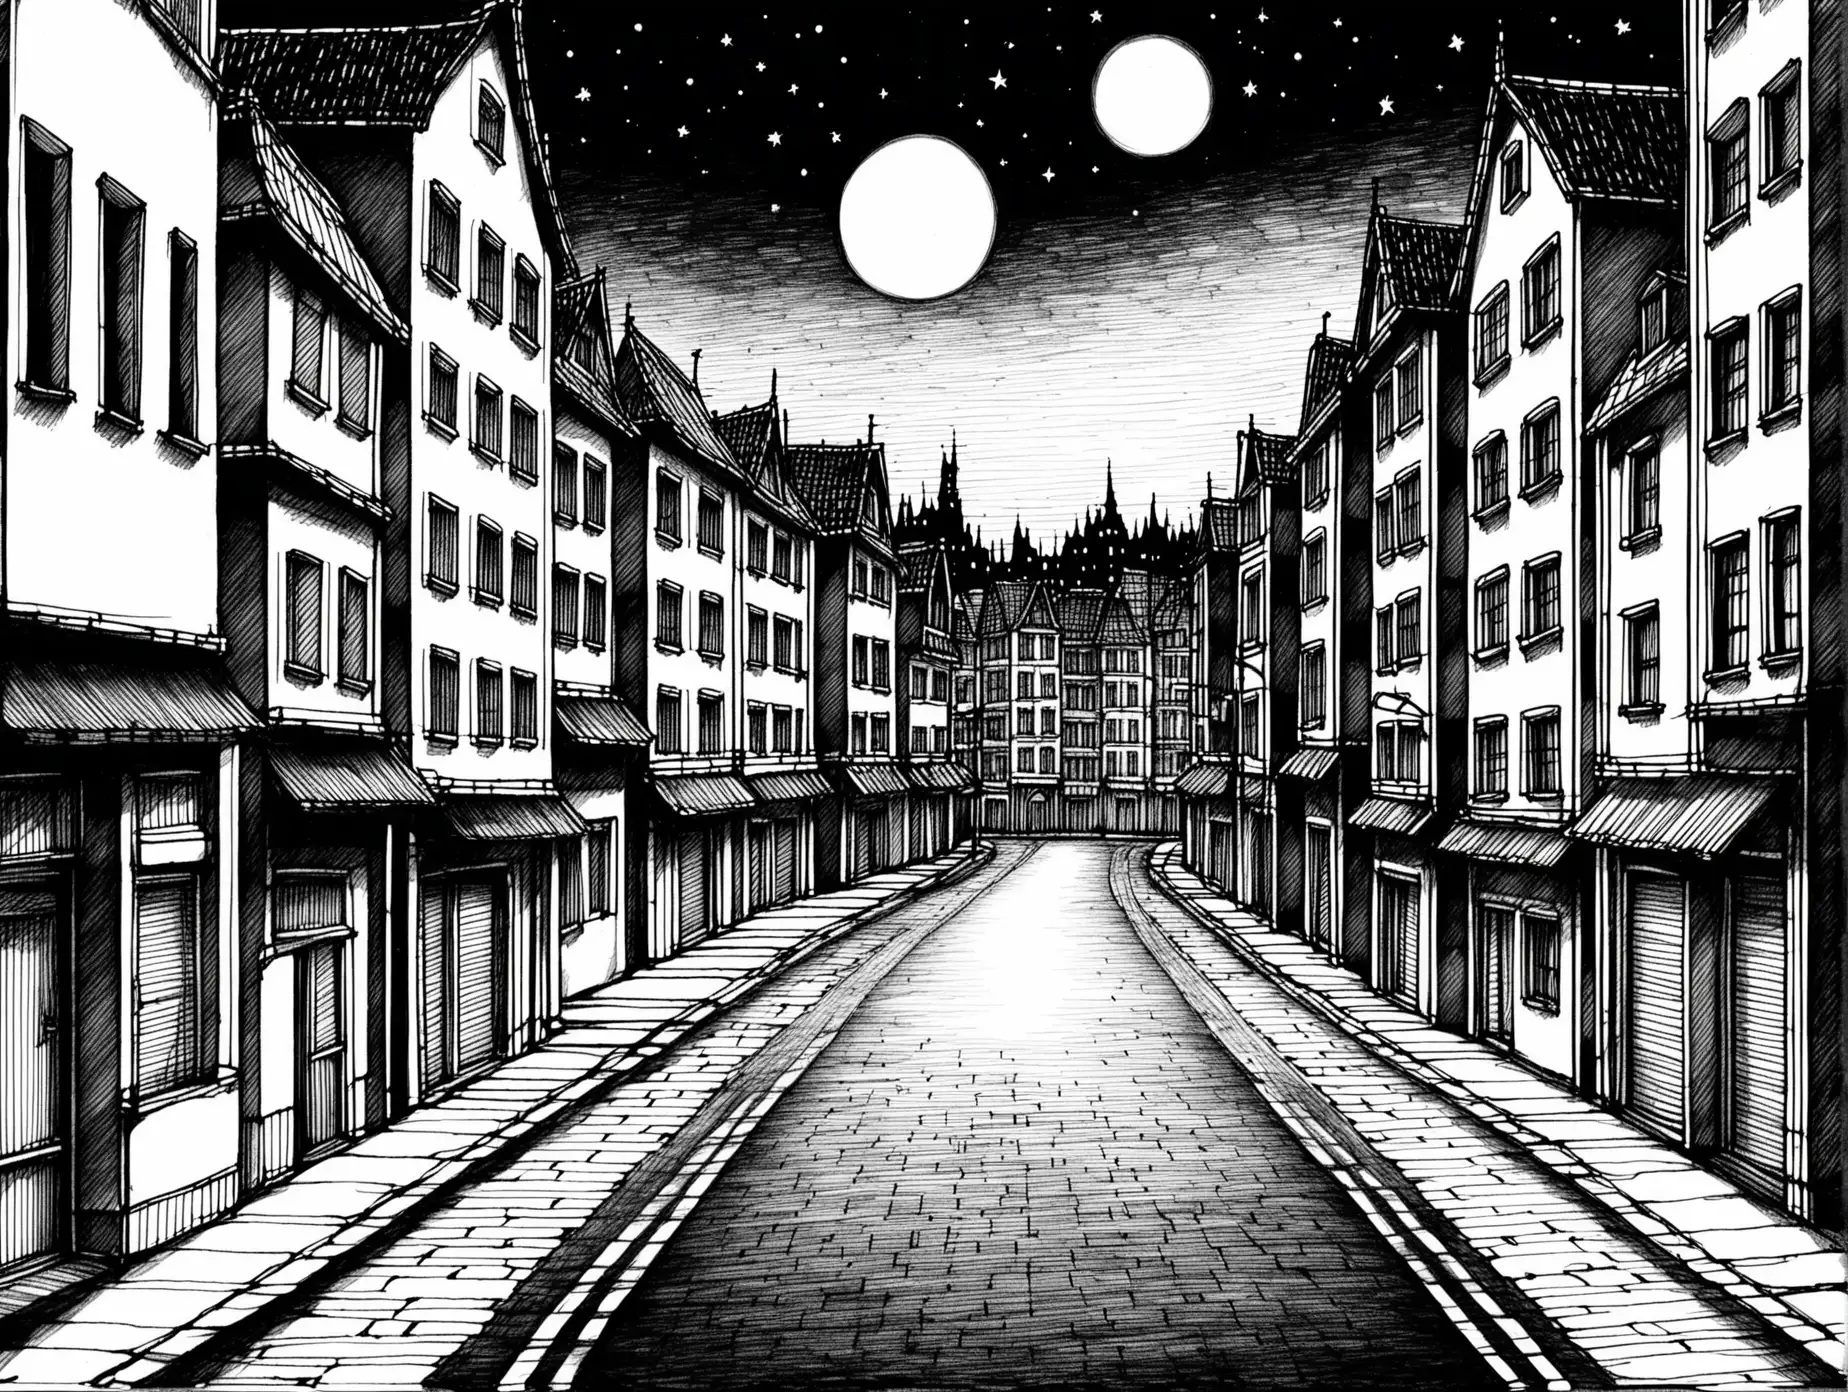 City, leaning buildings, drawn with a big felt-tip pen, cartoon, empty street, view, nighttime, black and white